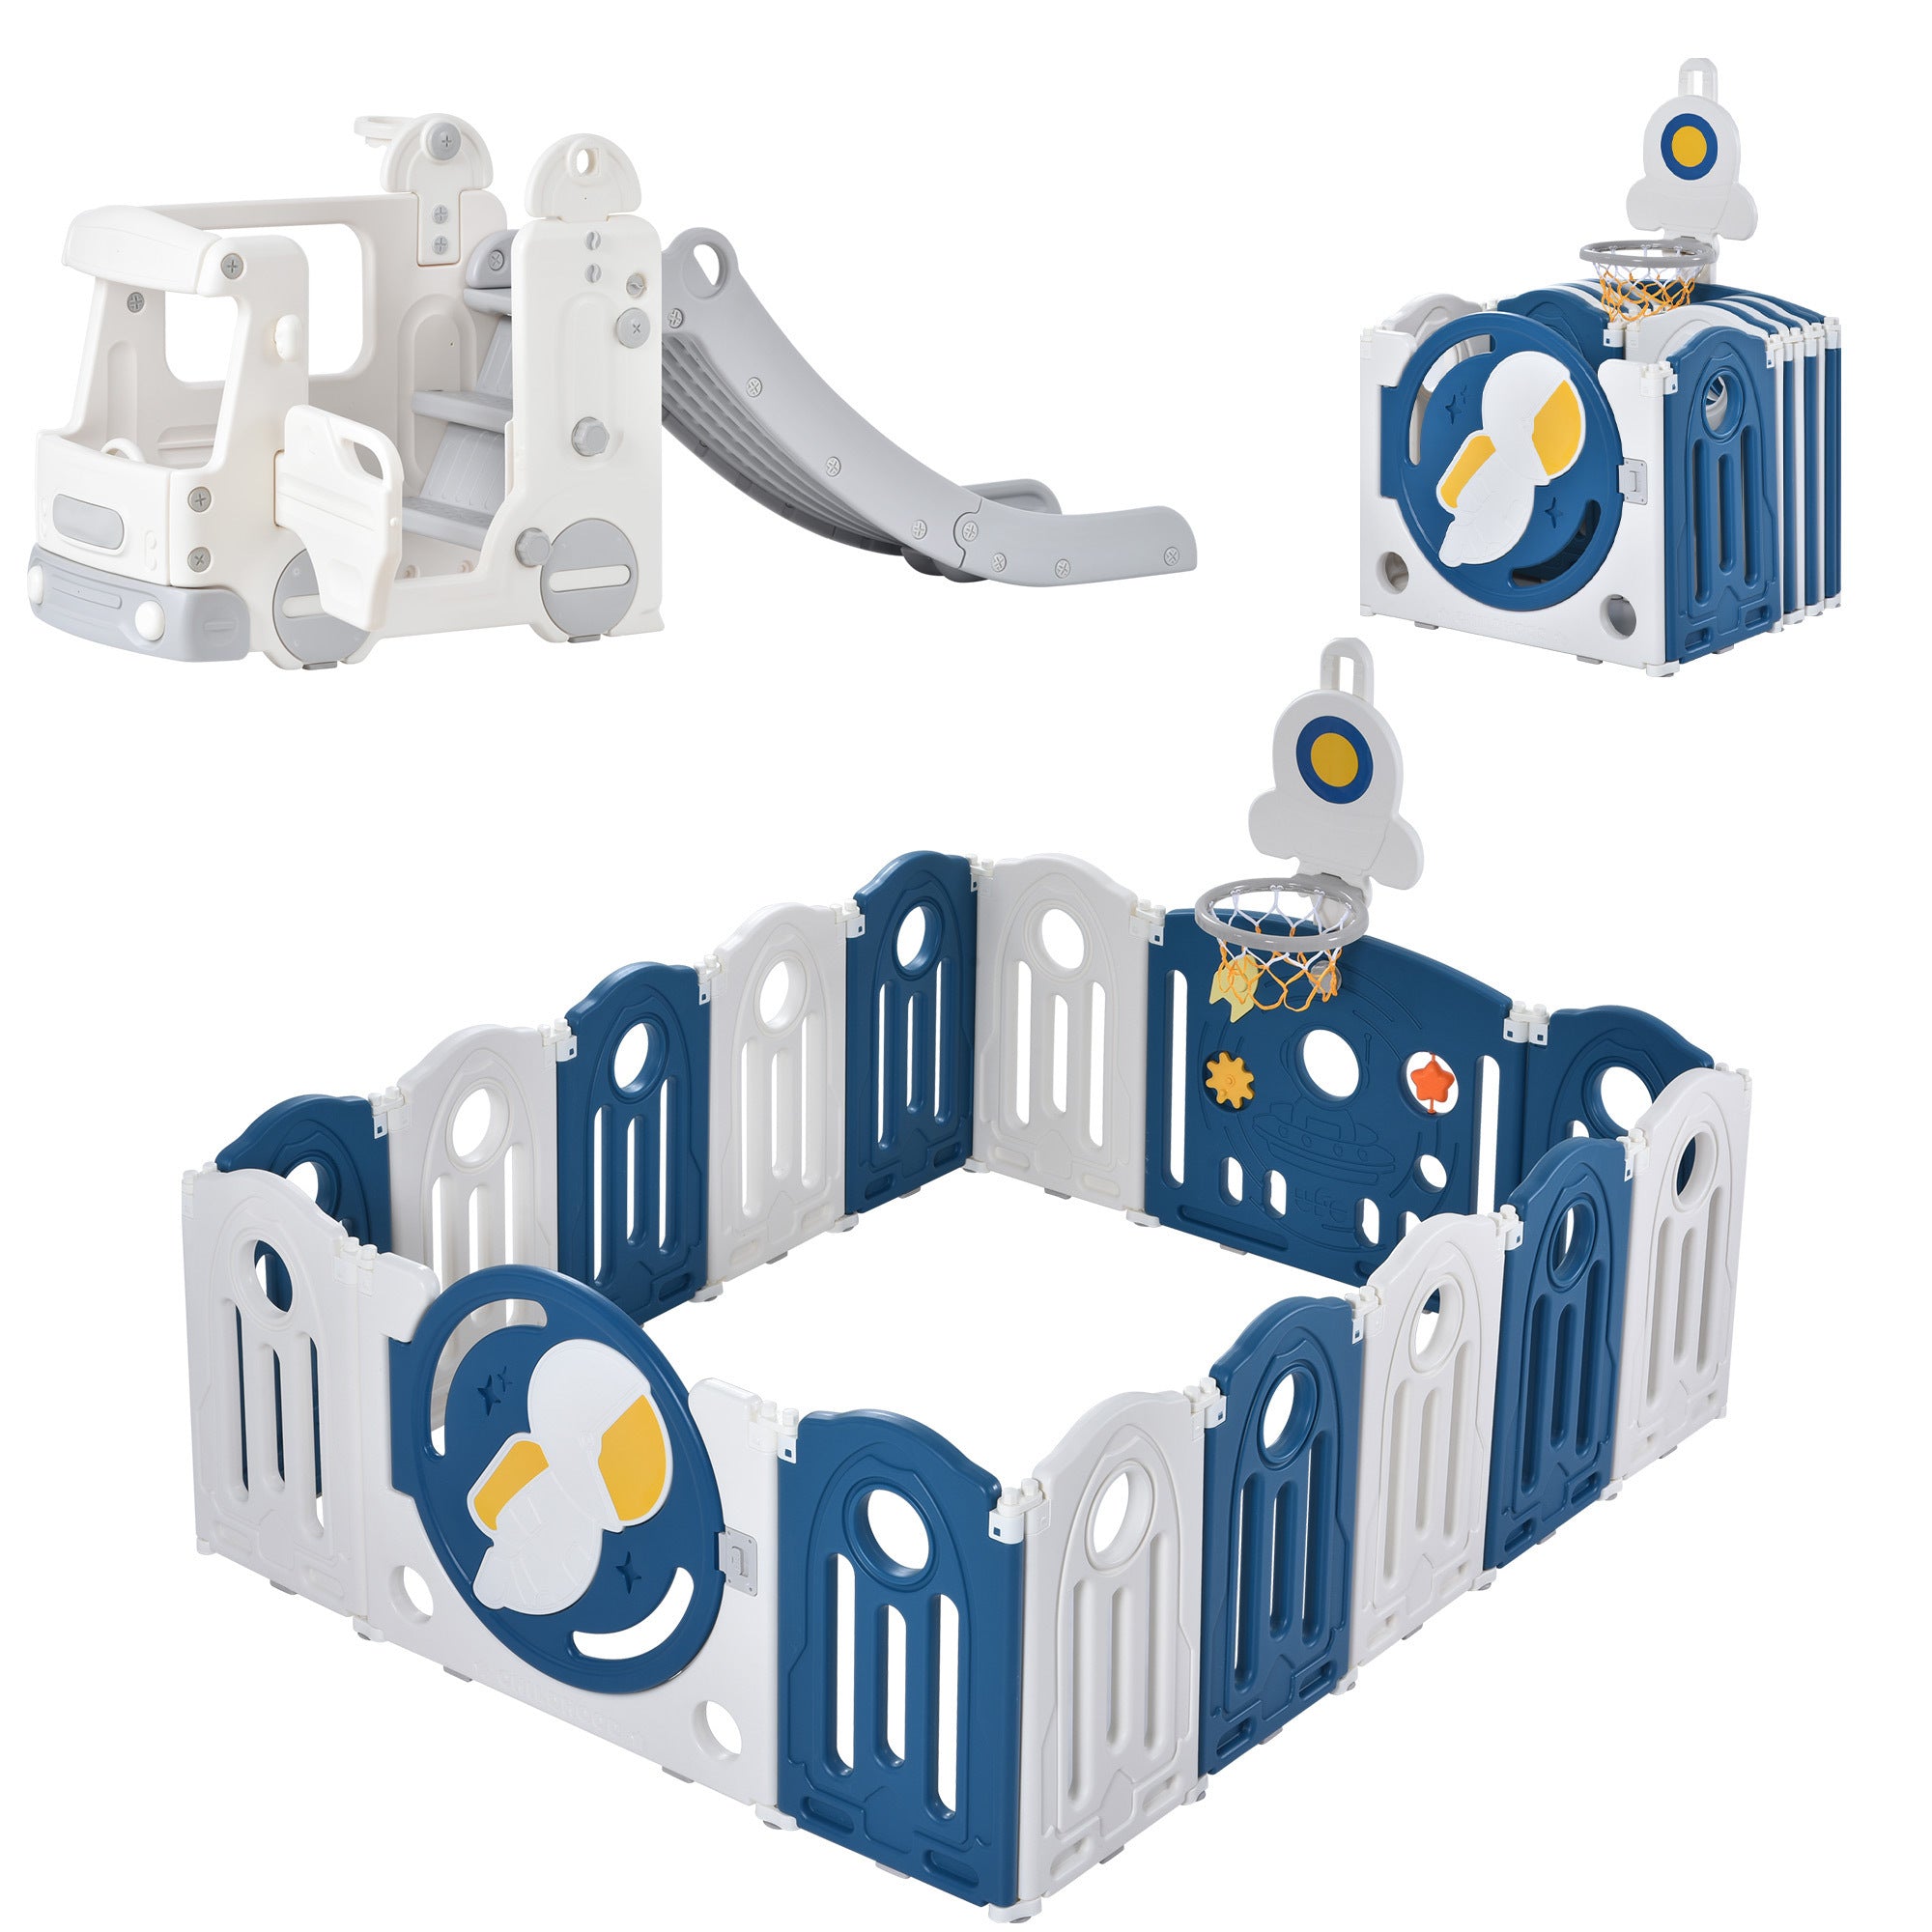 Baby Playpen for Toddler Astronaut Theme Set 1